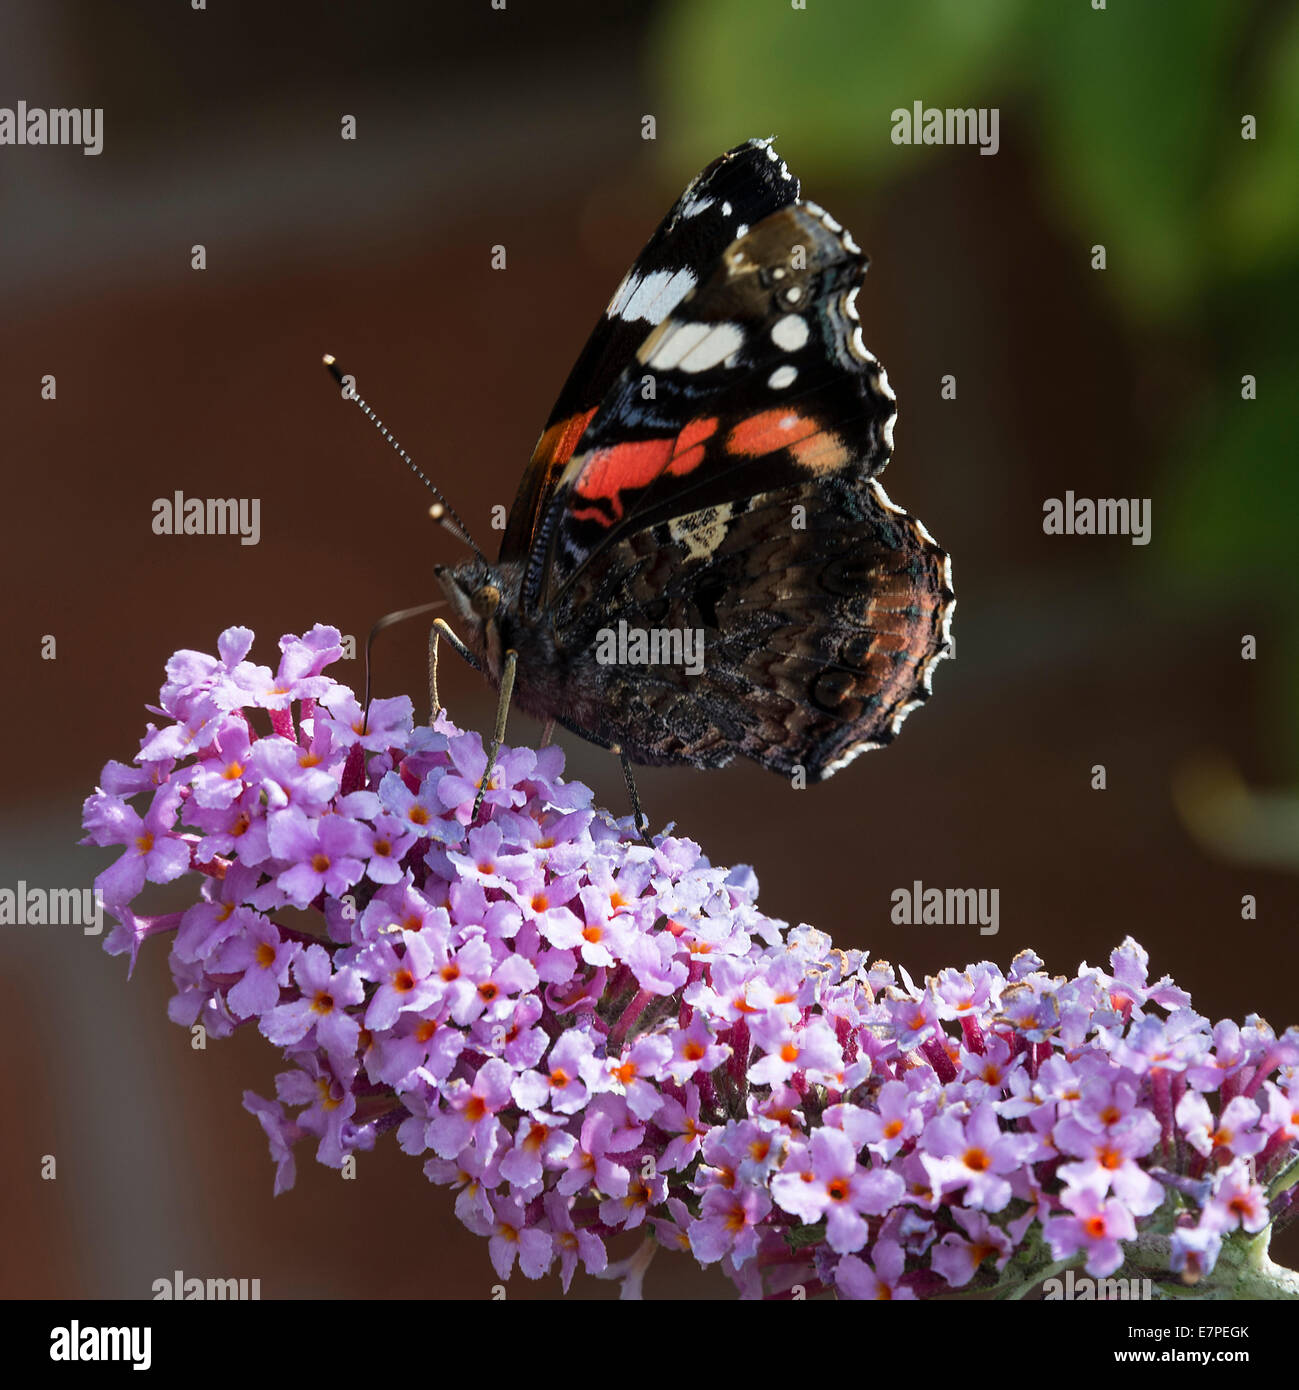 A Red Admiral Butterfly Feeding on a Purple Buddleja Flower in a Cheshire Garden England United Kingdom UK Stock Photo